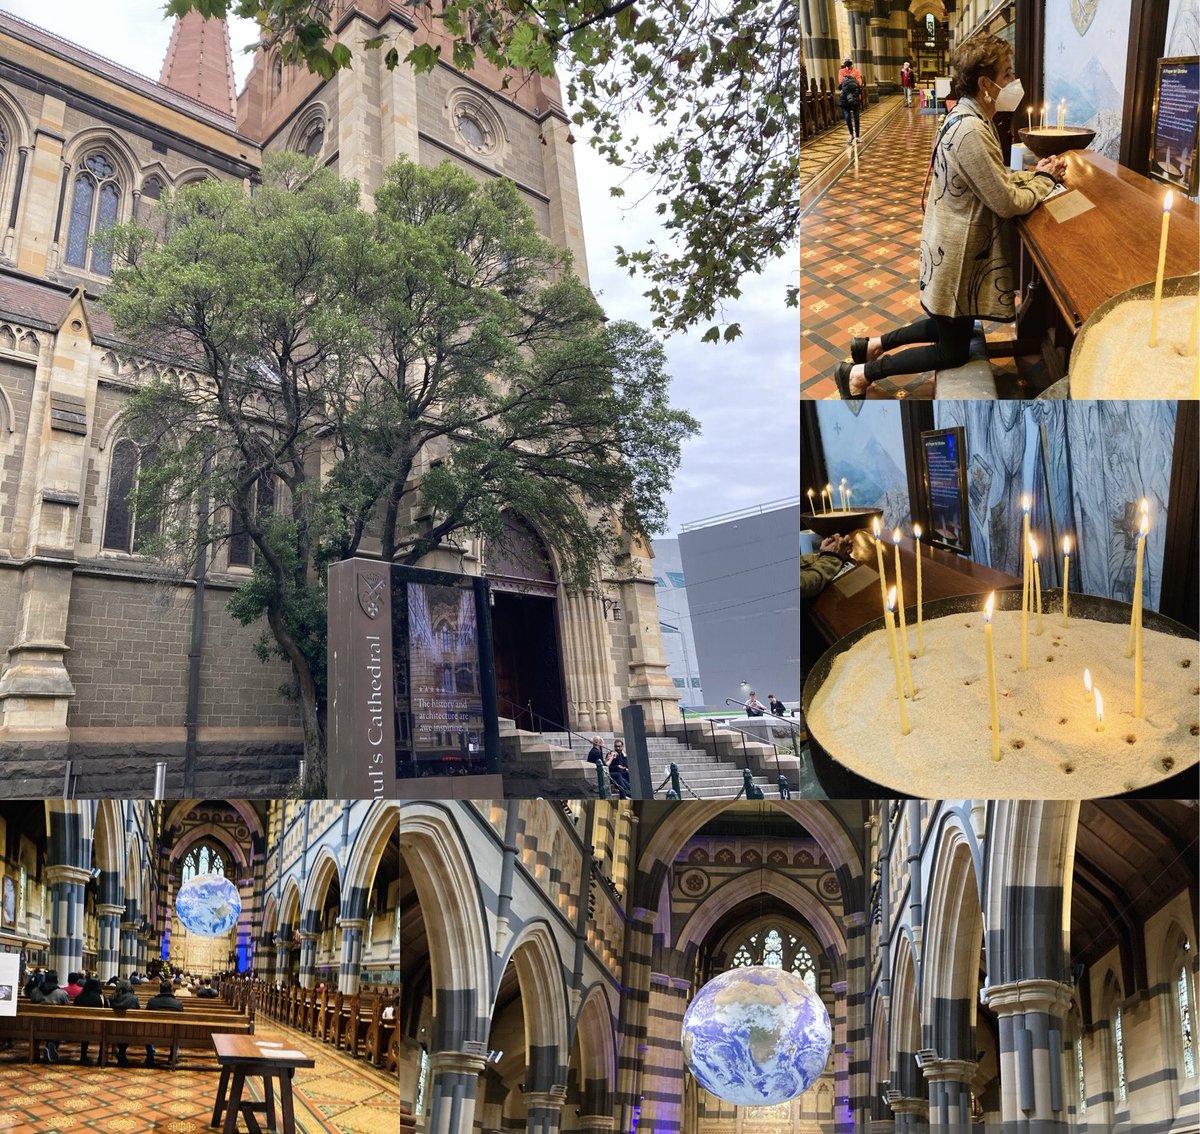 We visited beautiful #StPaulsCathedral #Melbourne
We lit our #candles #mother on her knees praying for #world #peace an end to #wars #violence #hatred ………
#GivePeaceAChance
#JusticeForAll #NoJusticeNoPeace
⁦@ArchbishopThabo⁩
⁦@sgcathedral⁩ 
🌍☮️🌏🕊🌎